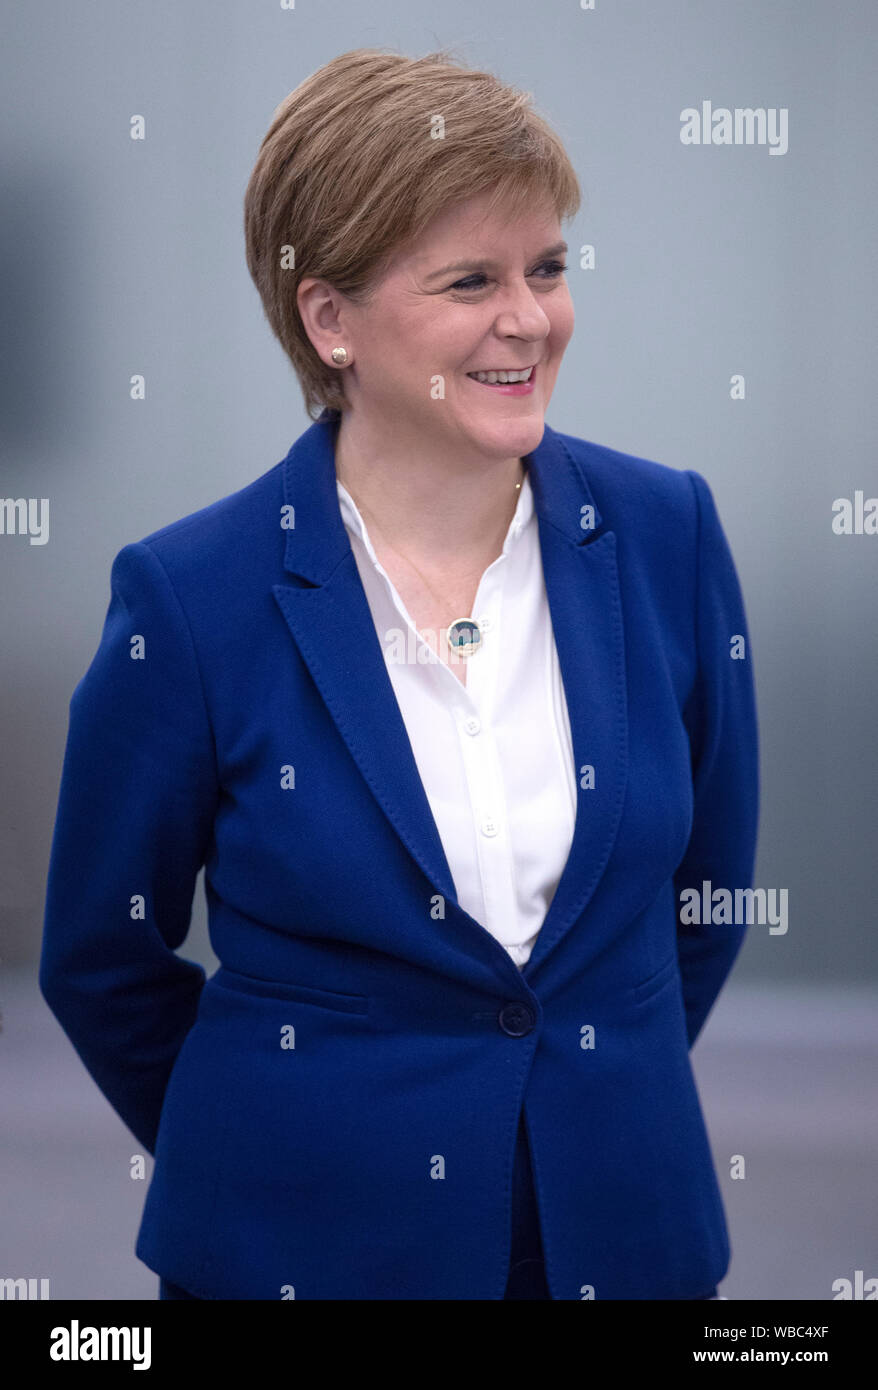 First Minister of Scotland Nicola Sturgeon during a visit to the School of Engineering at the University of Glasgow, where the Scottish Government unveiled a new 5G plan. Stock Photo